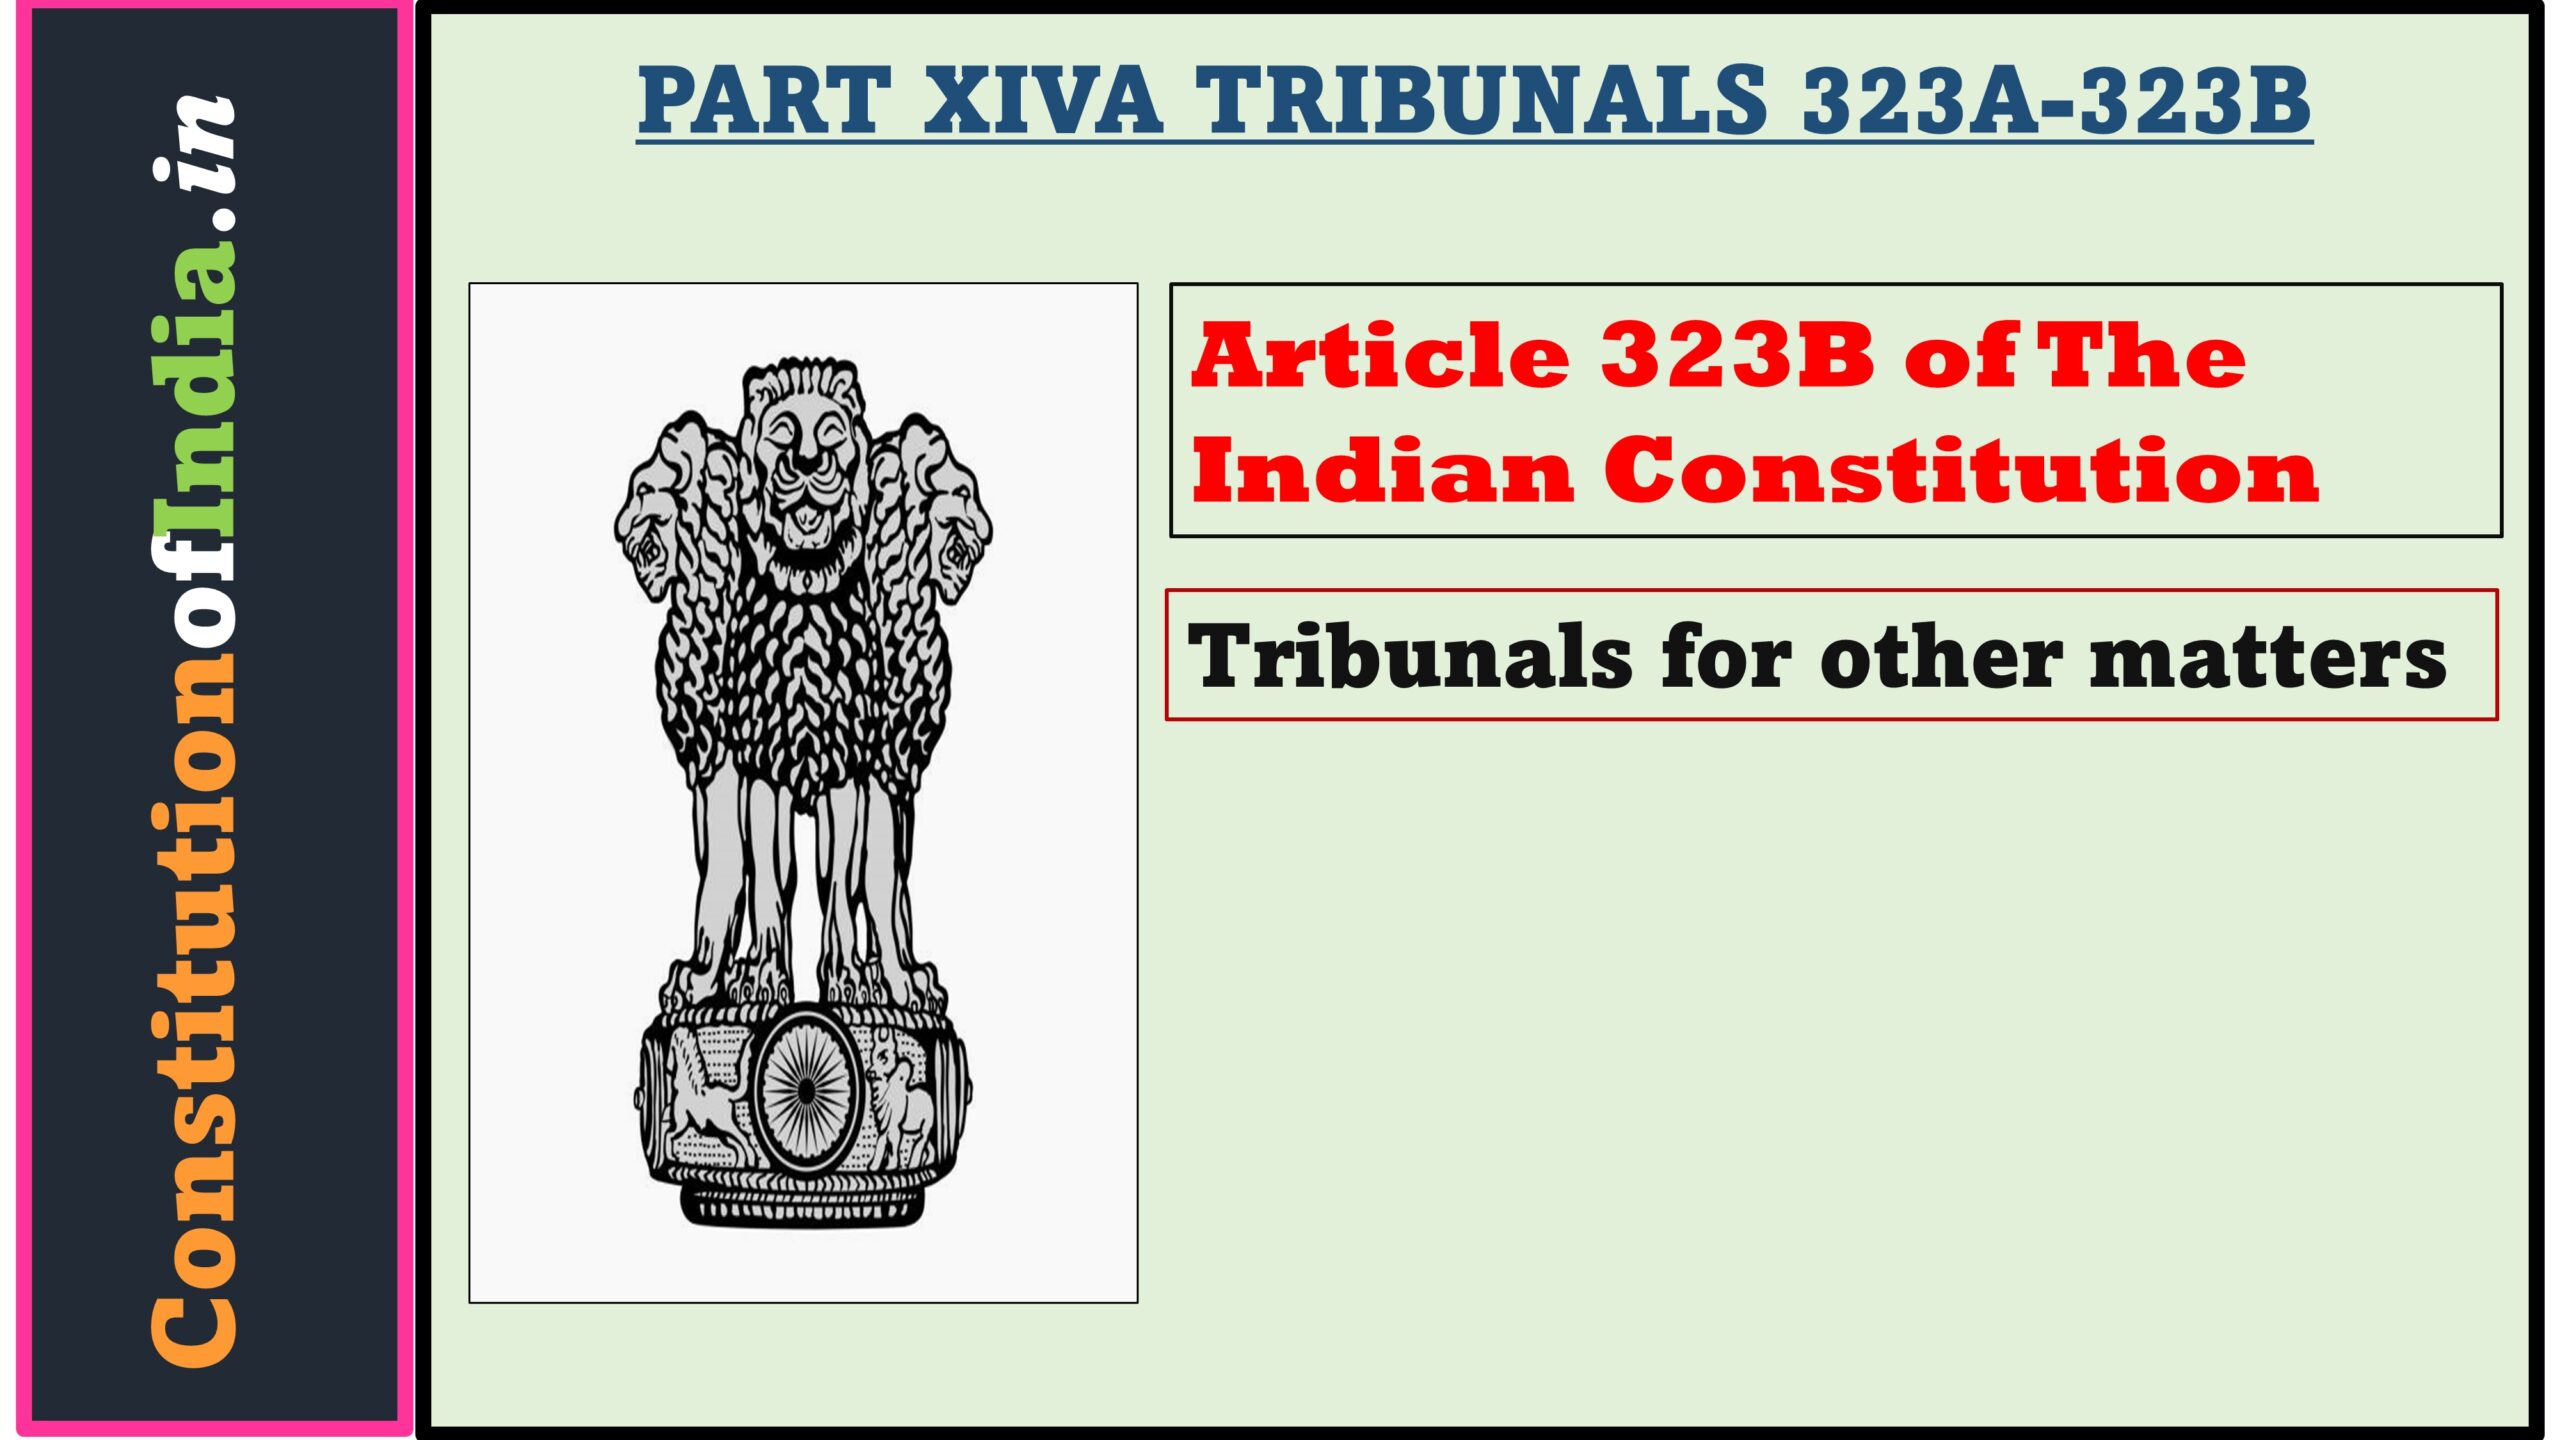 Article 323B of The Indian Constitution